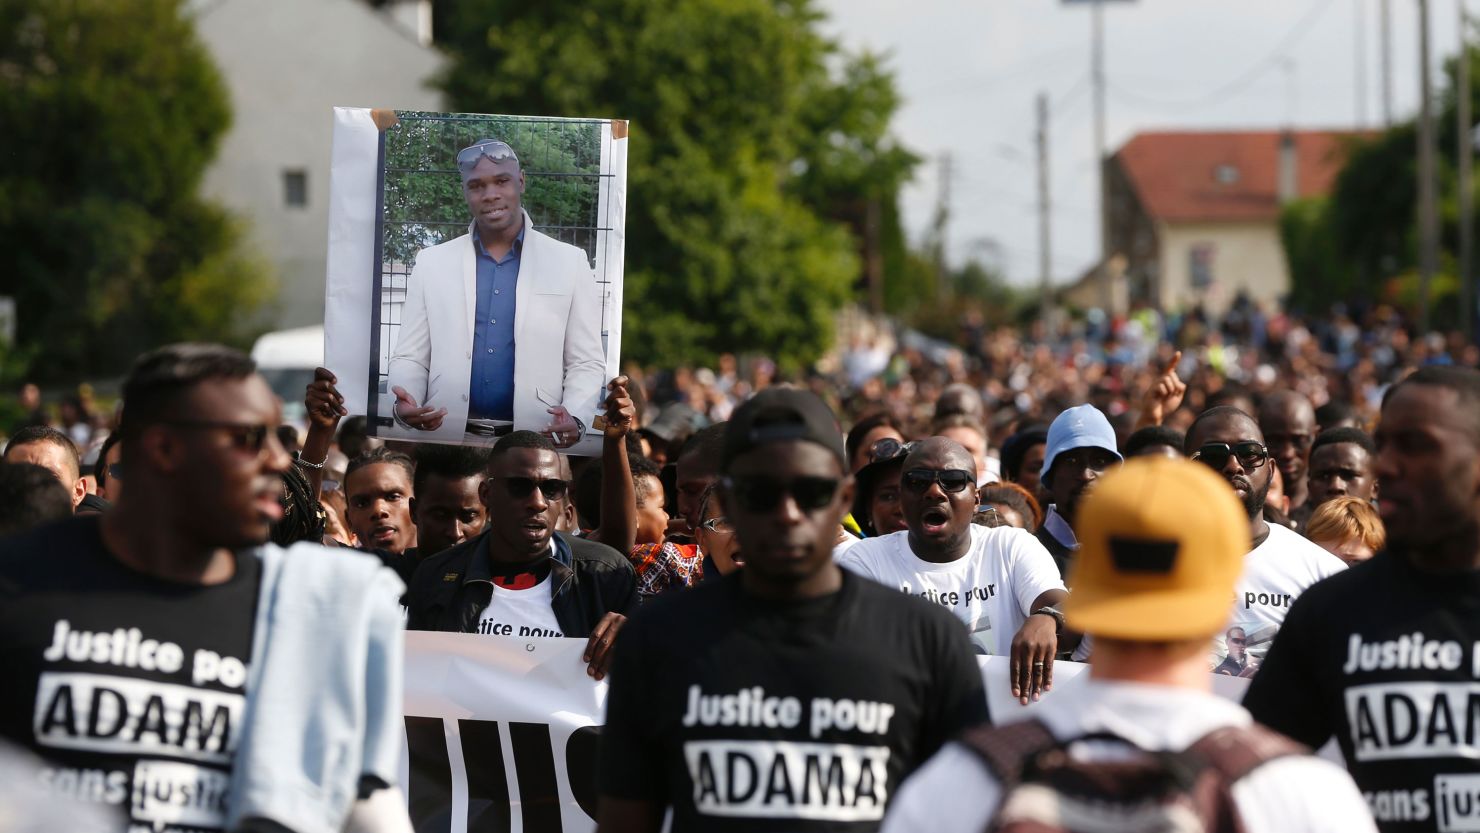 People hold a portrait picture of Adama Traore and wear T-shirts reading "Justice for Adama" on July 22, 2016.